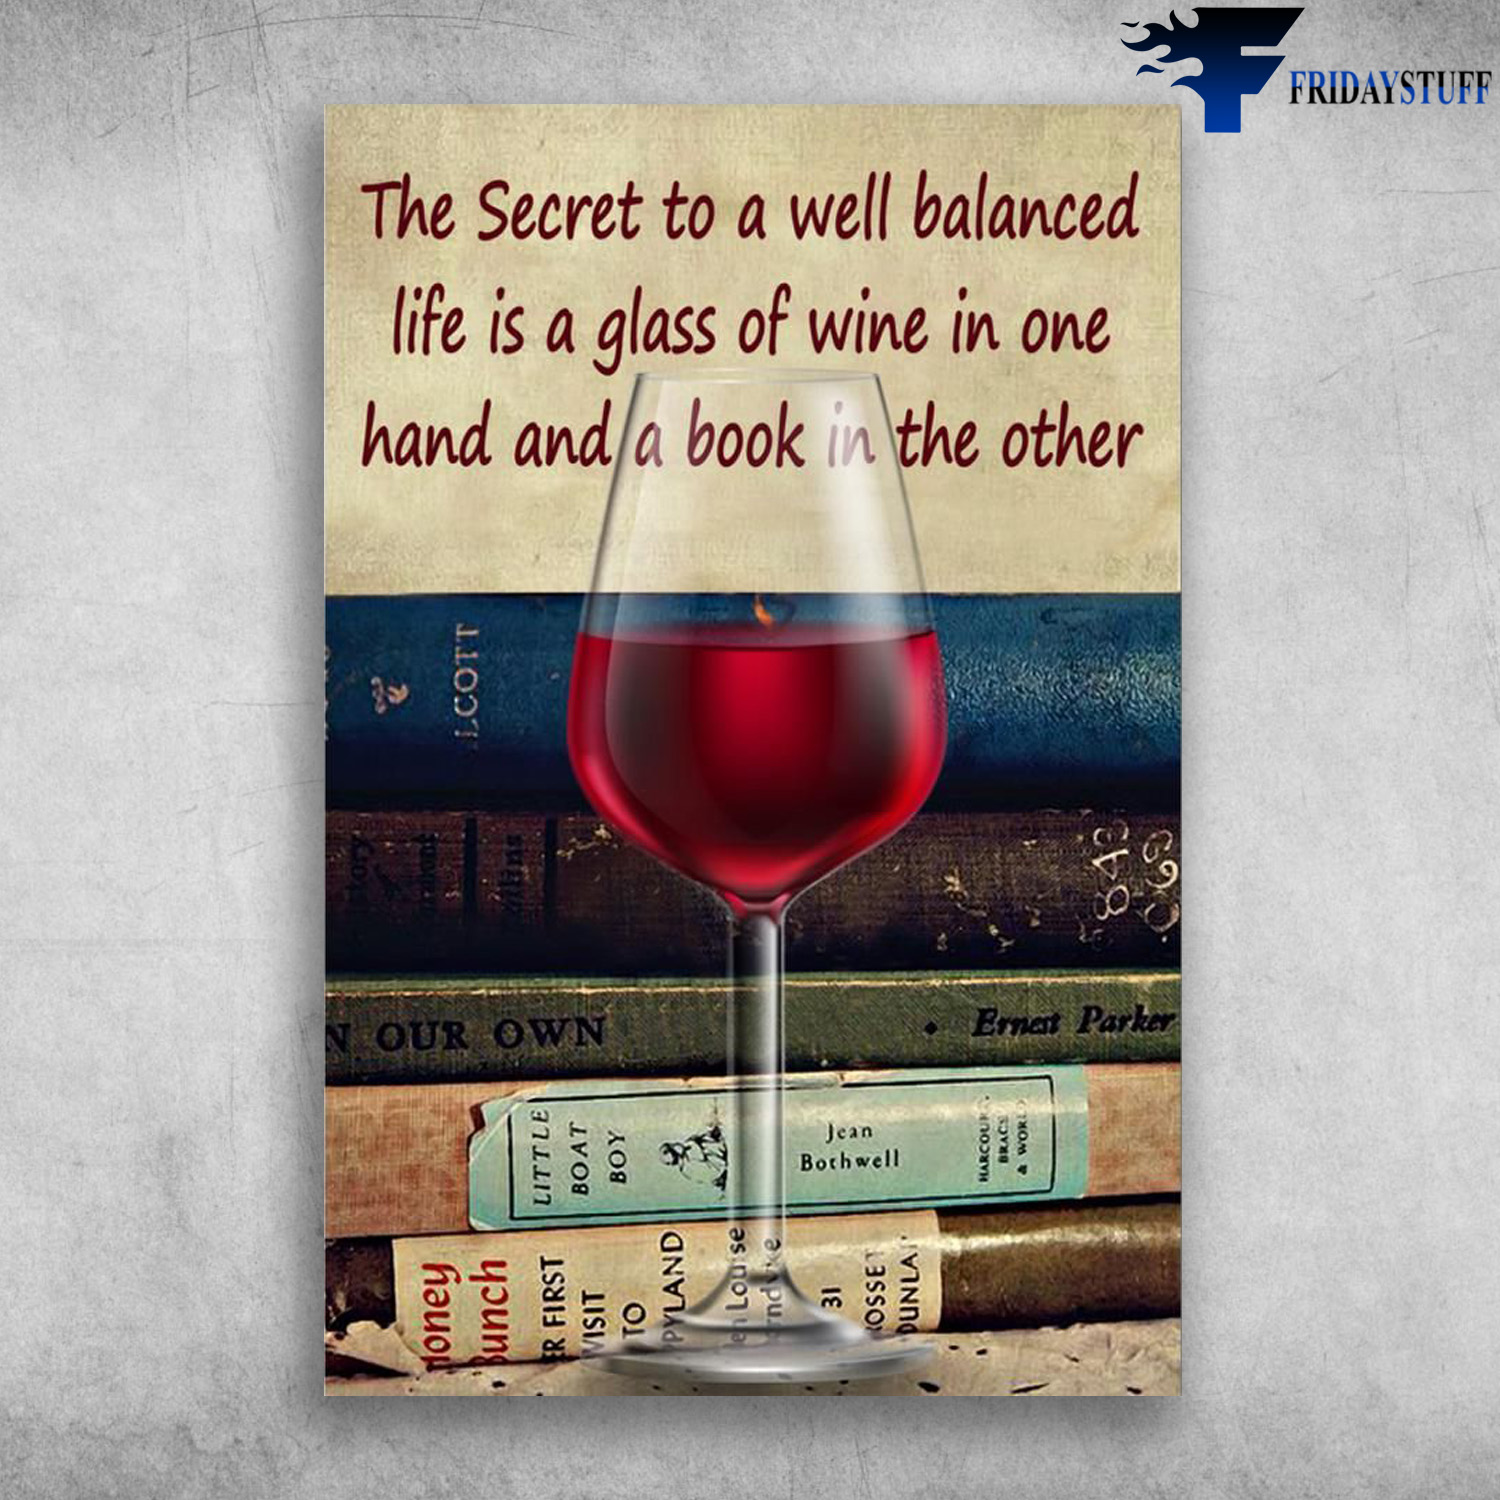 Wine And Books - The Secret To A Well Balanced Life, Is A Glass Of Wine In One Hand And A Books In The Other